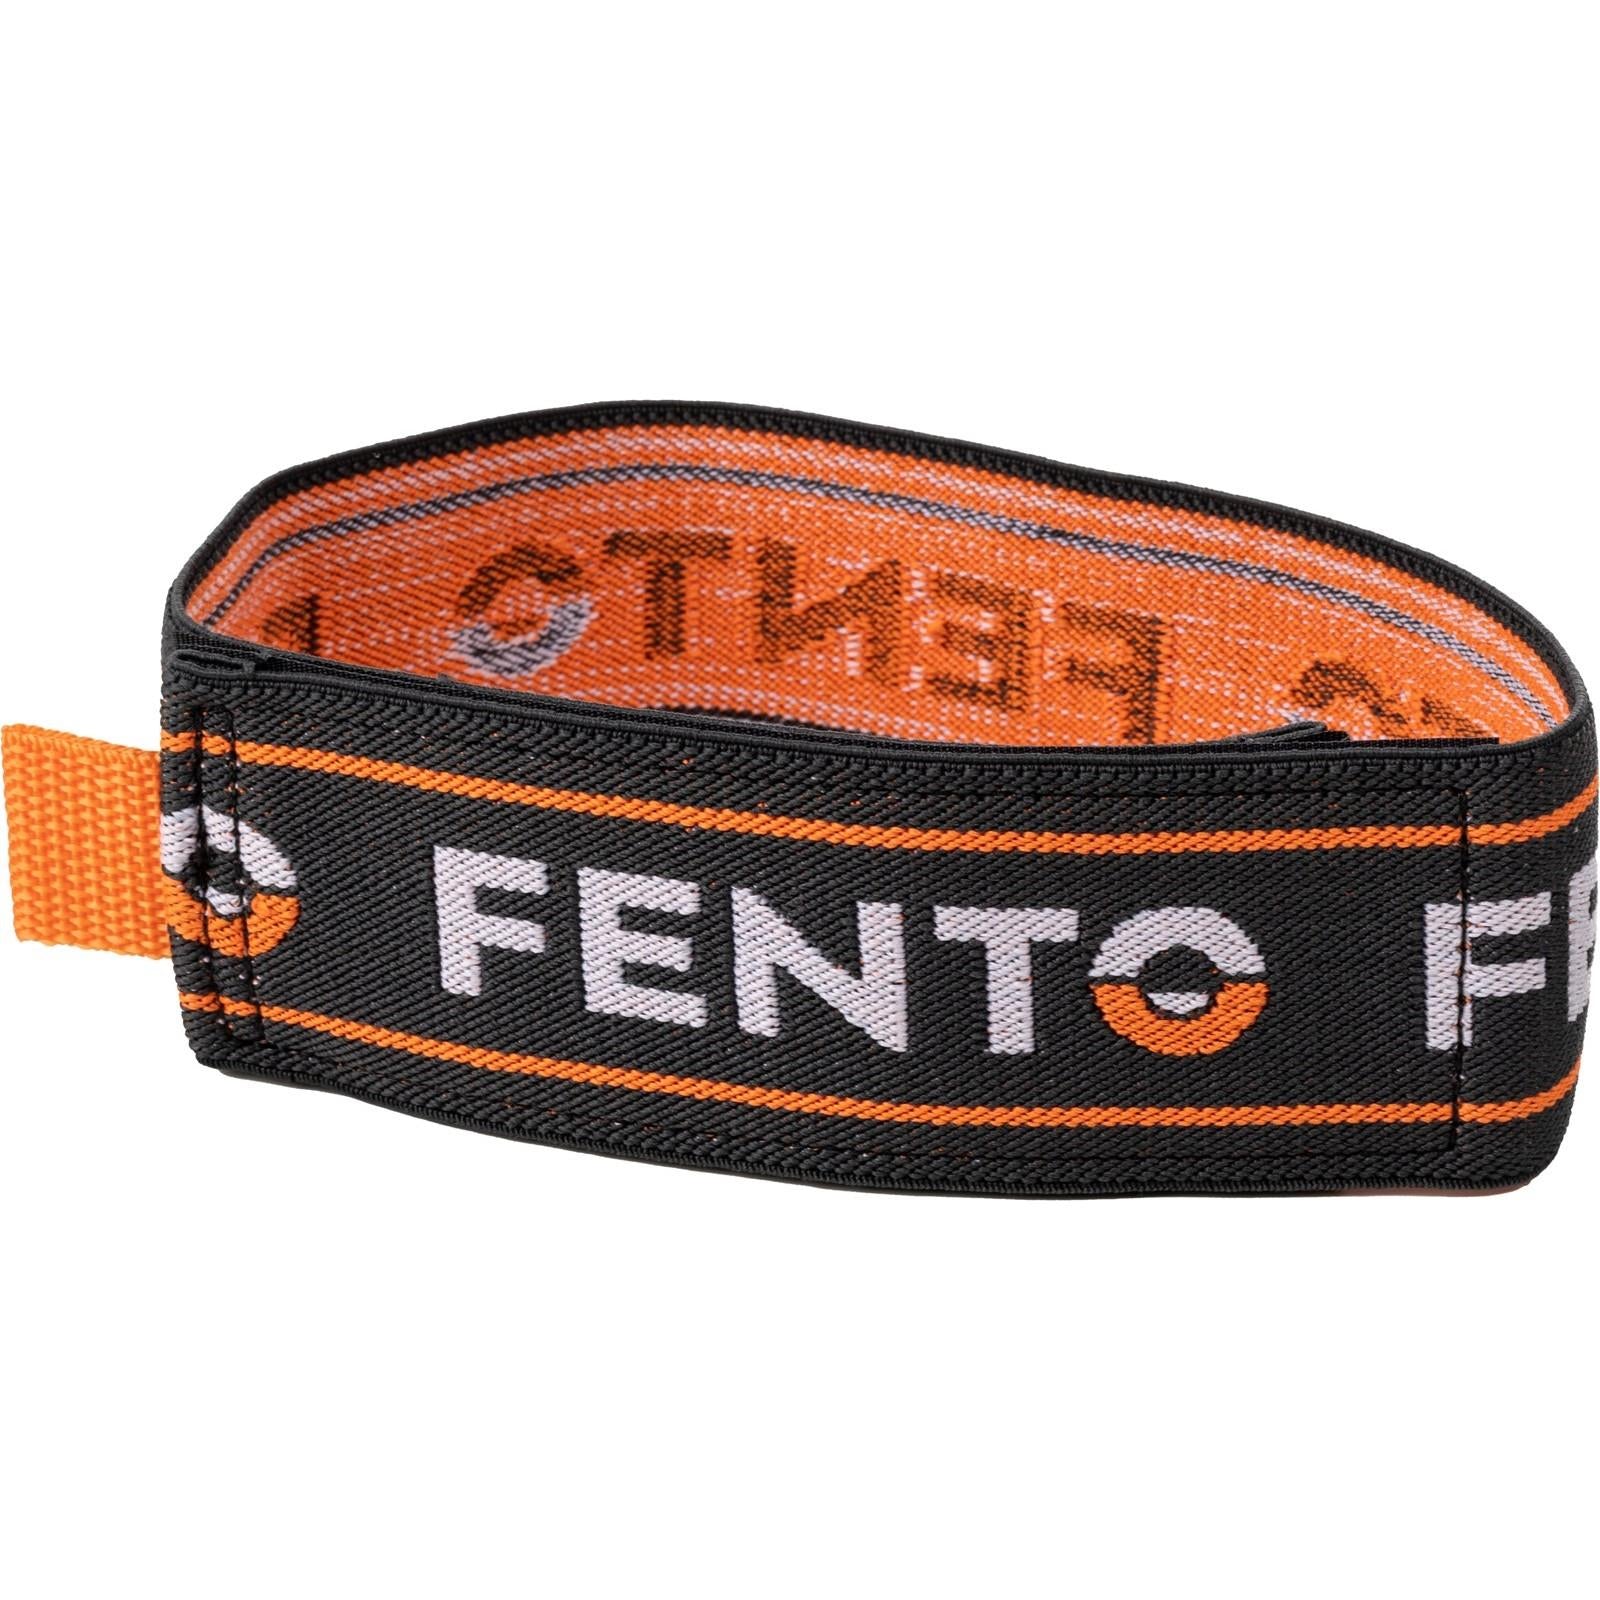 Fento original replacement elastic straps with velcro - pack 2